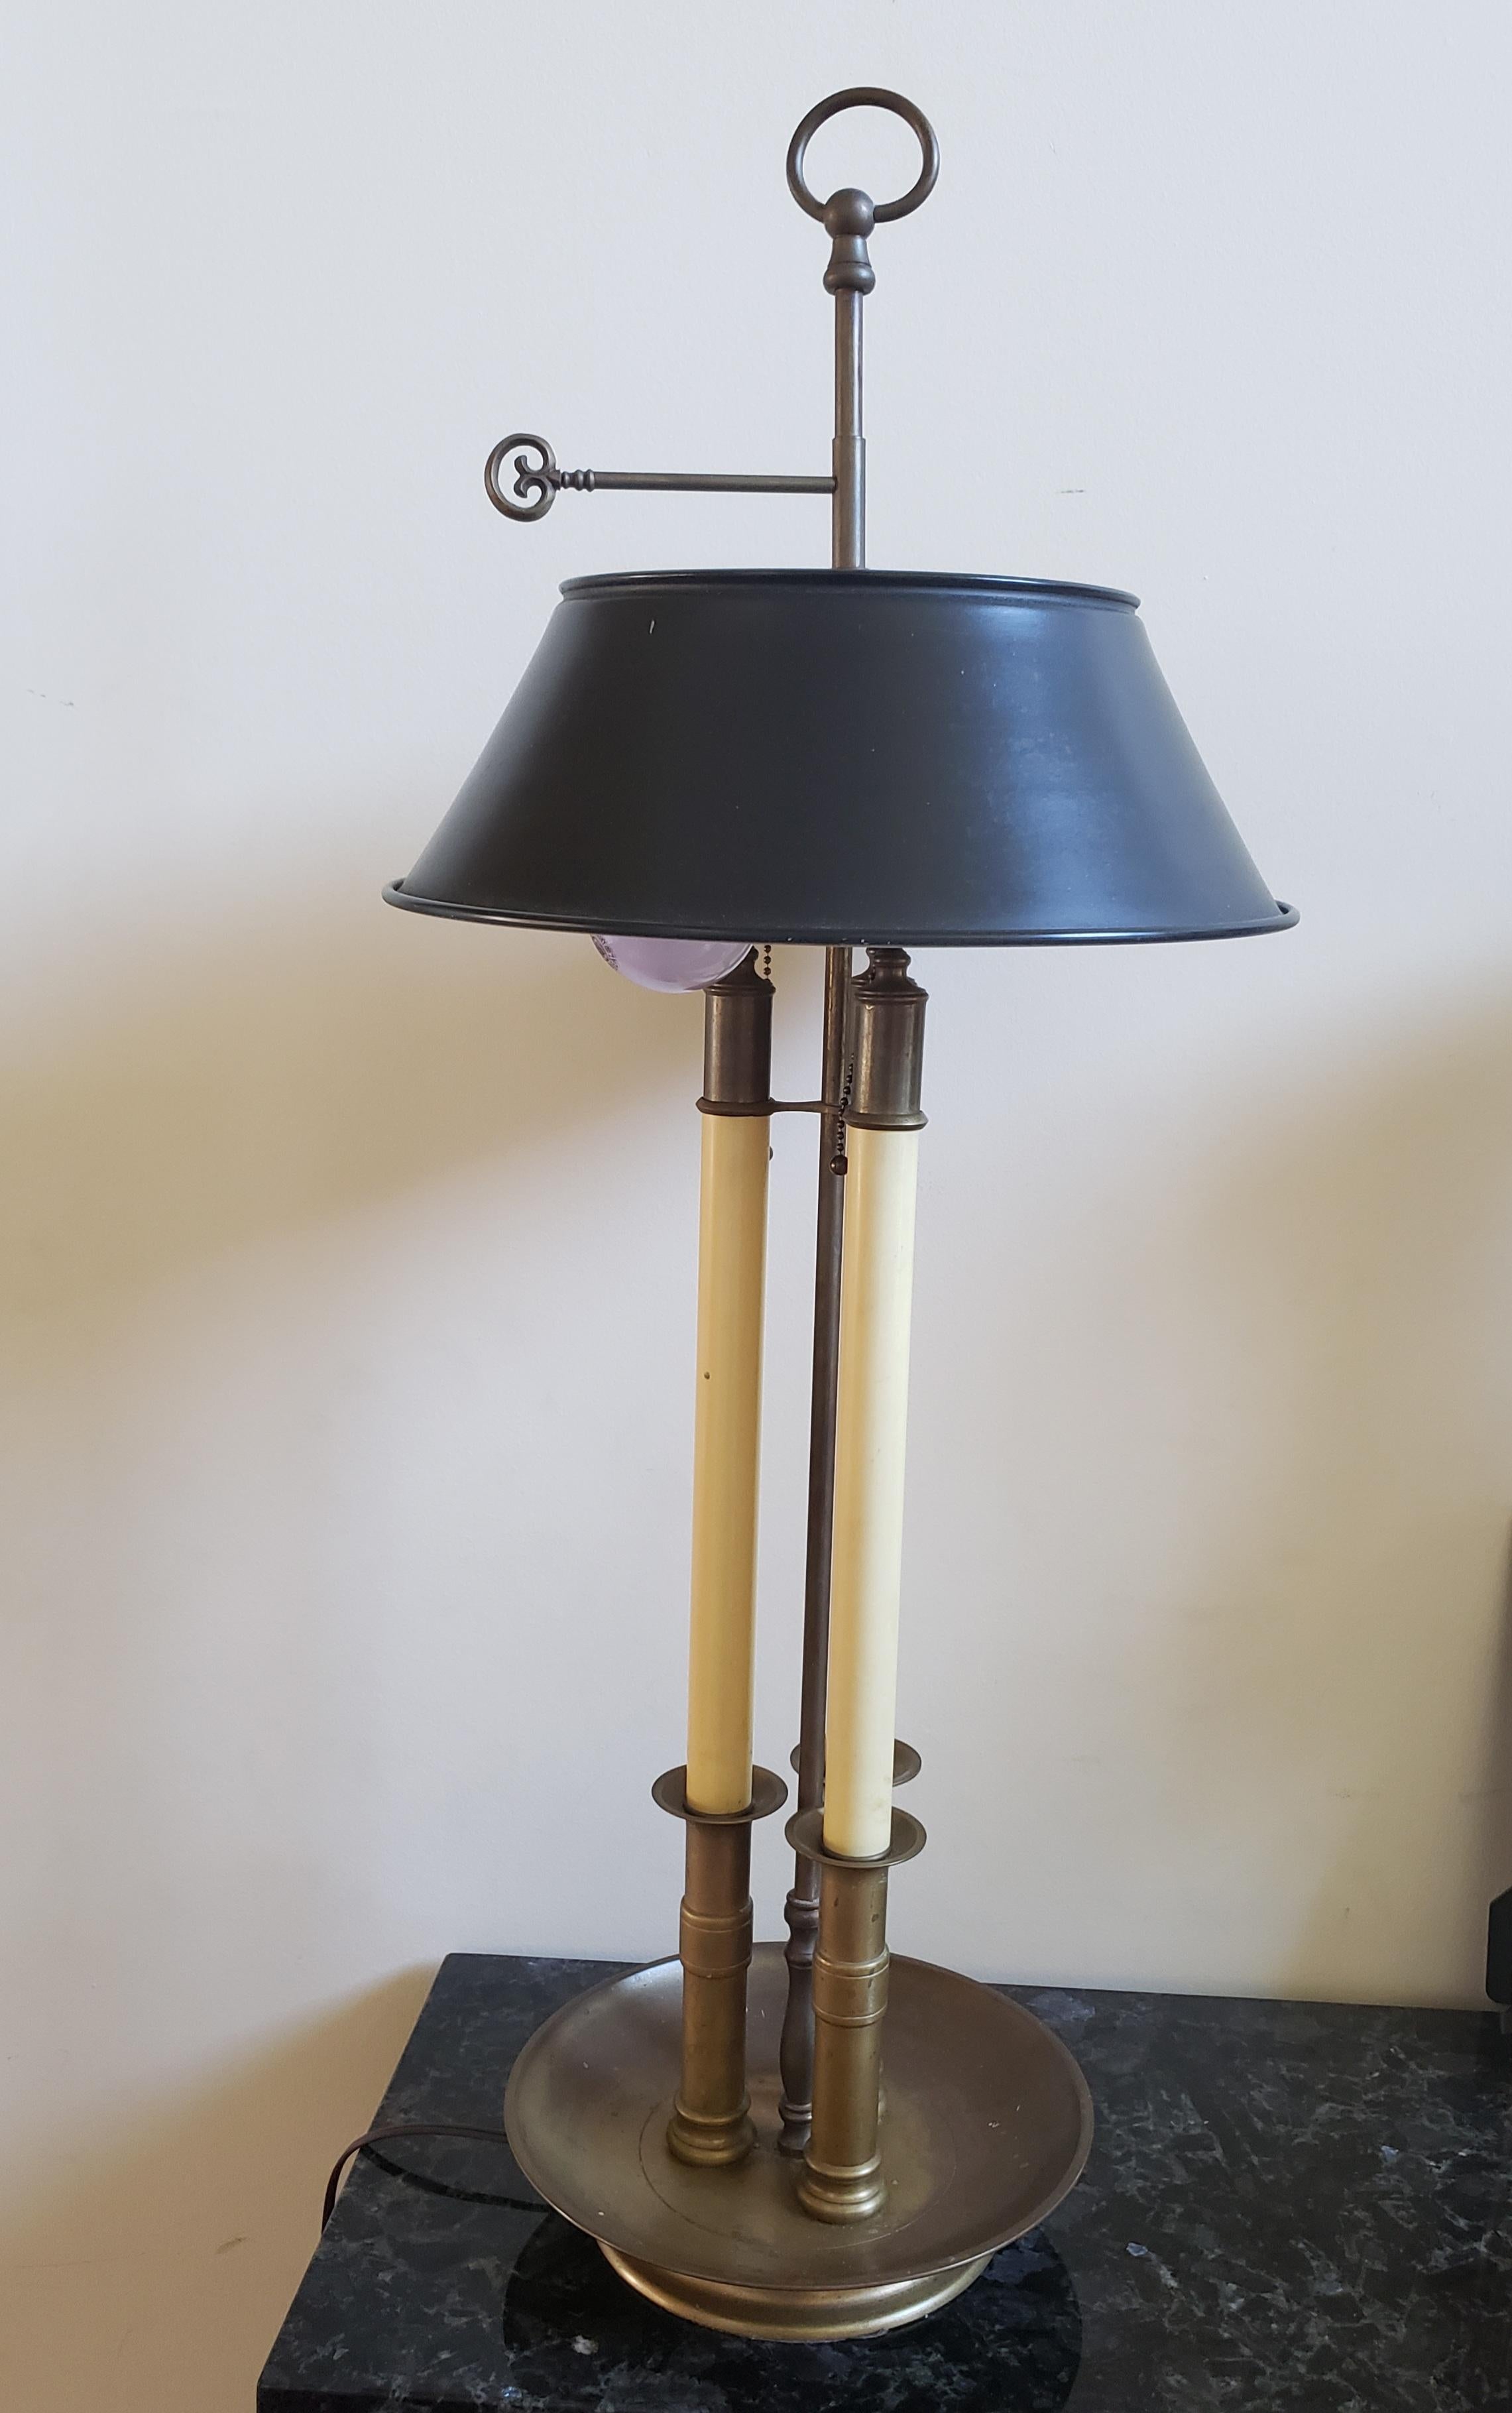 1972 Chapman Patinated Metal Bouillotte Lamp with Tole Shade For Sale 1